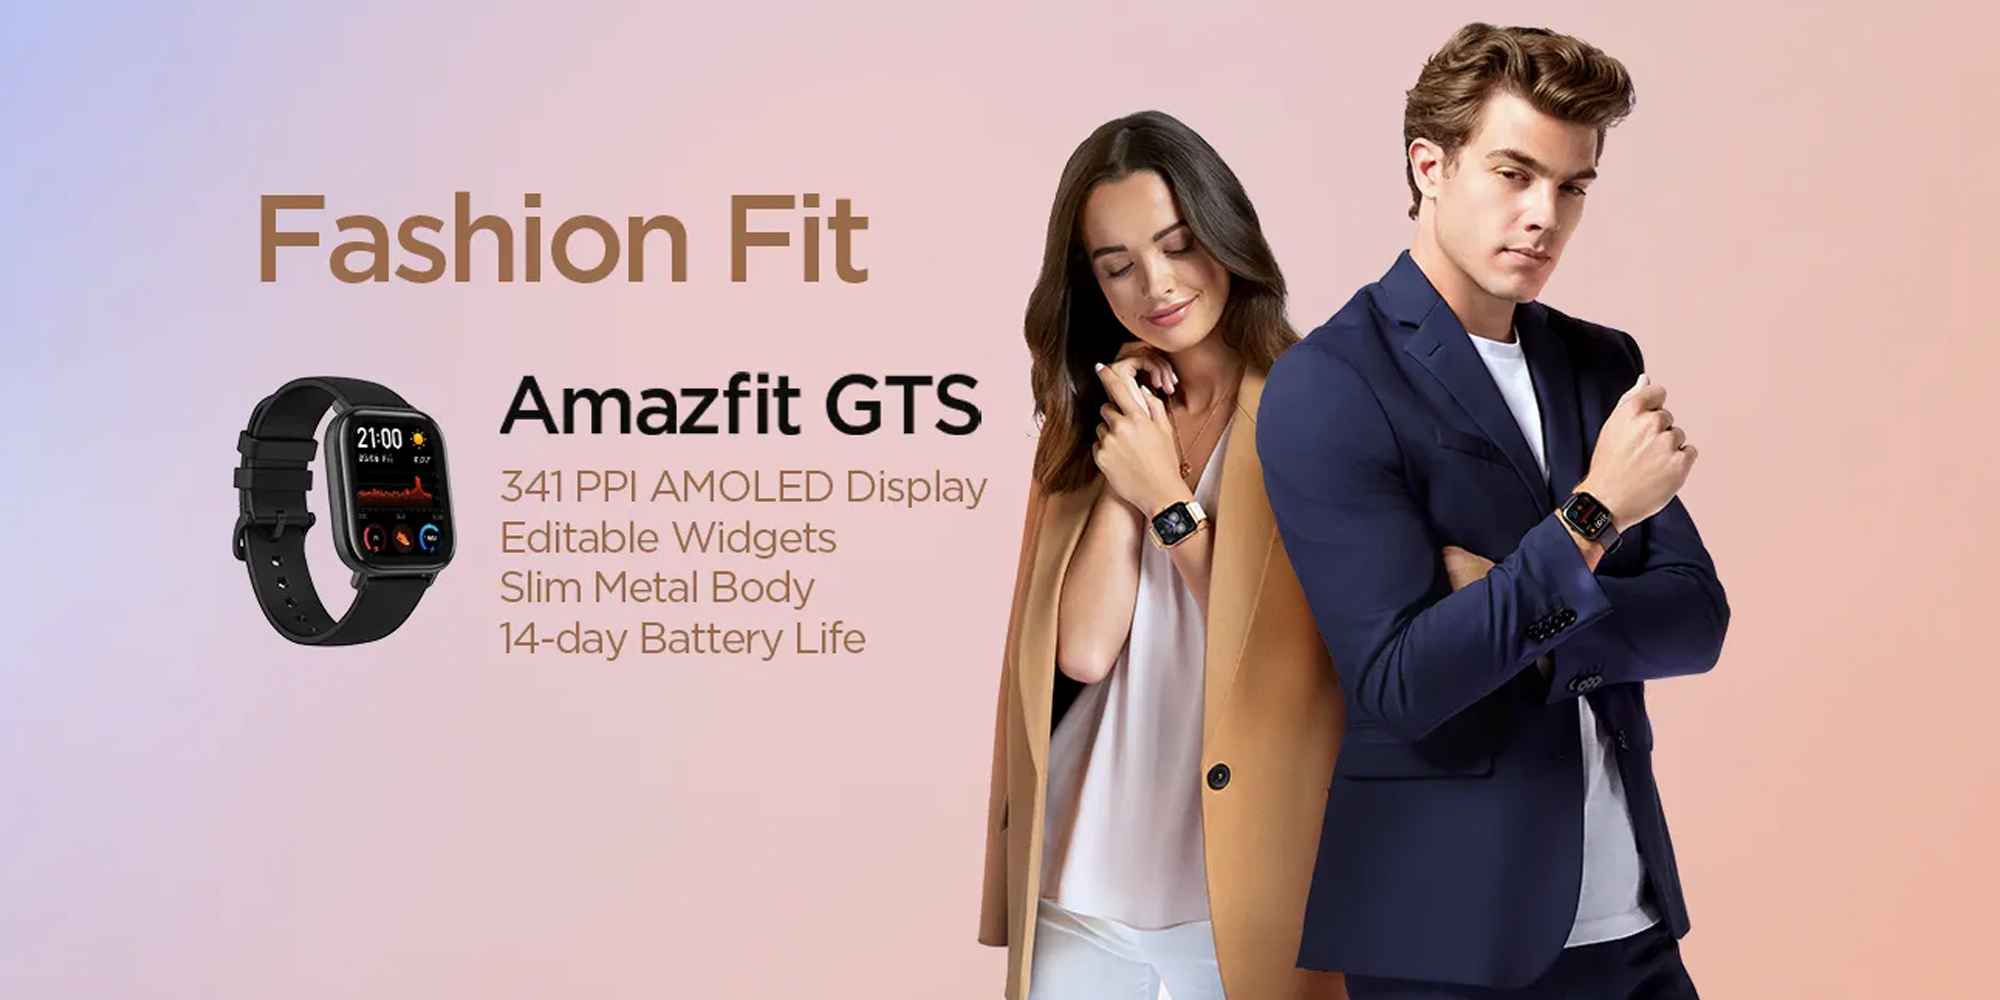 Amazfit GTS Vermilion Orange Smartwatch with 1.65" AMOLED Display, 5 ATM Water Resistance, 12 Sports Modes, and 14-Day Battery Life